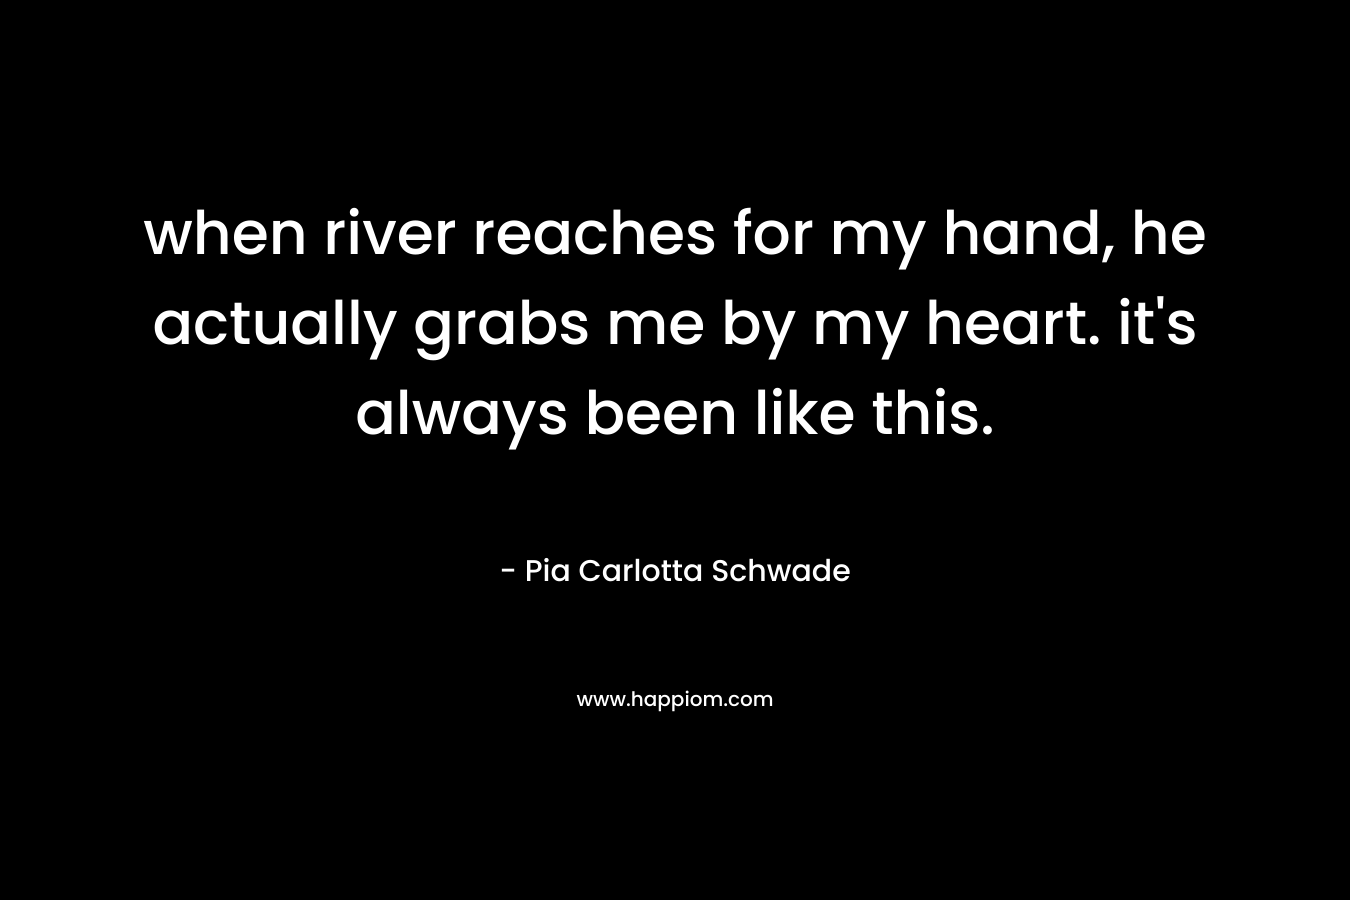 when river reaches for my hand, he actually grabs me by my heart. it’s always been like this. – Pia Carlotta Schwade